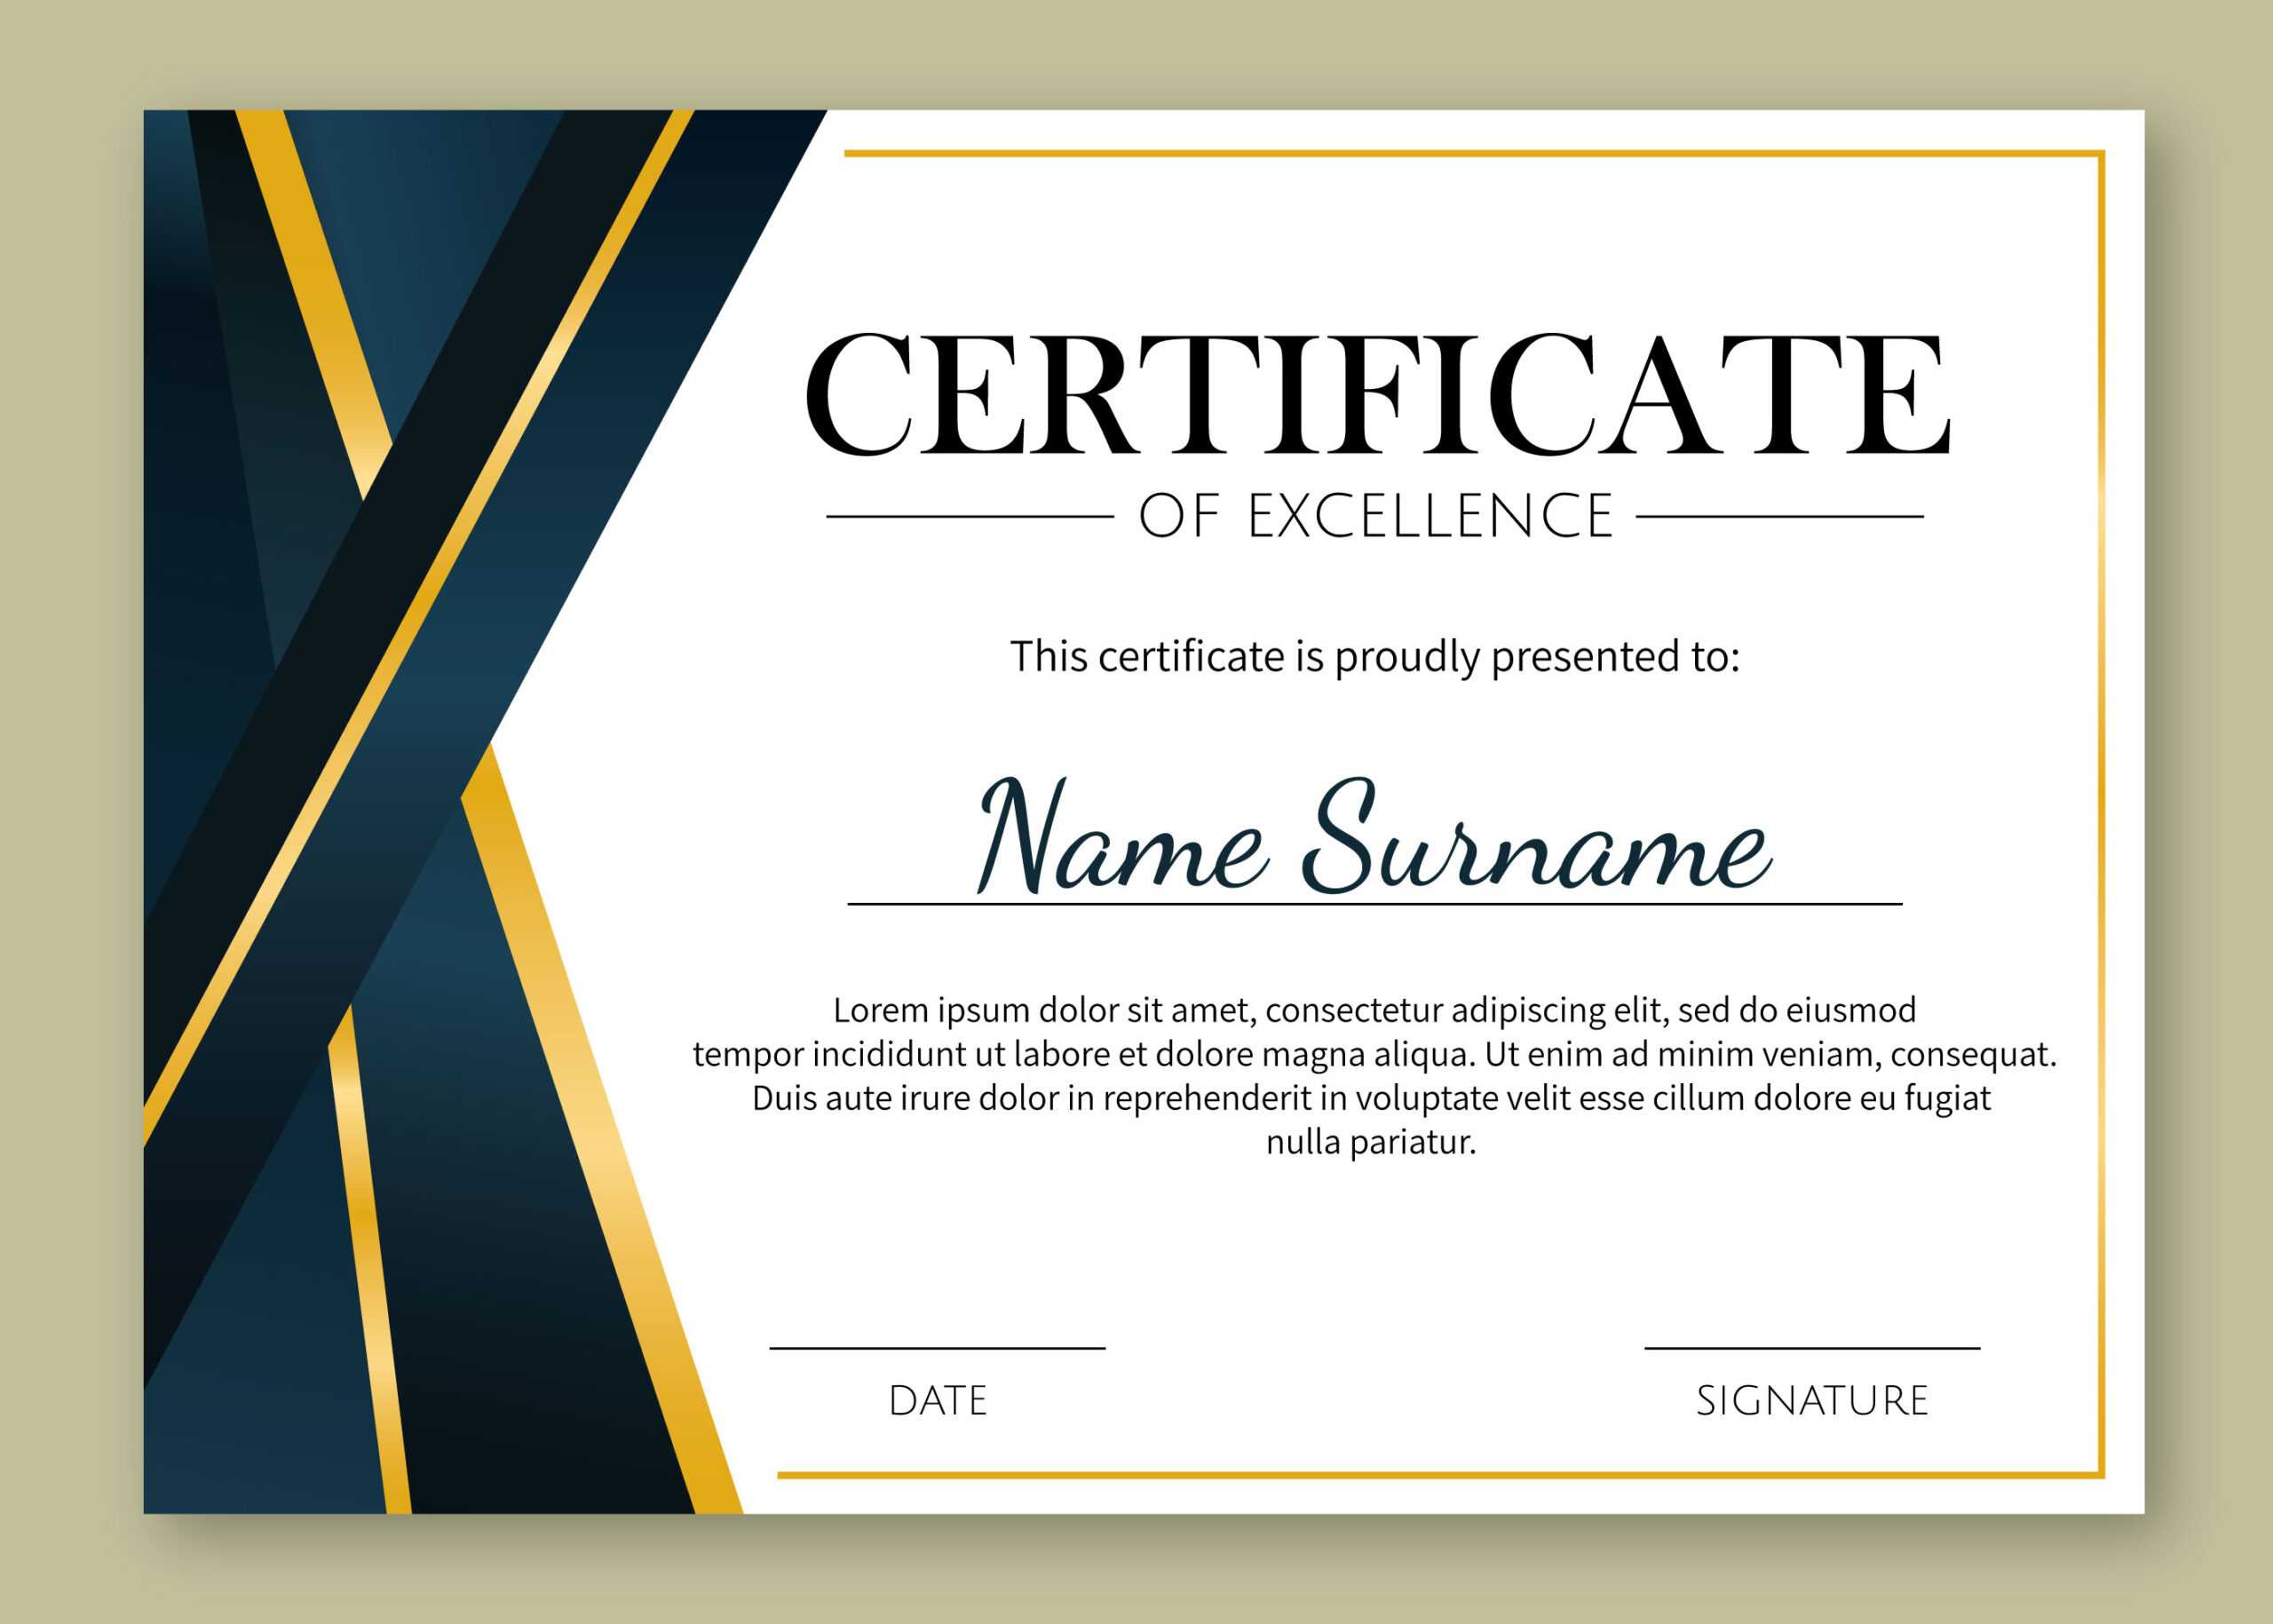 Certificate Of Excellence Template Free Download Regarding Certificate Of Excellence Template Free Download